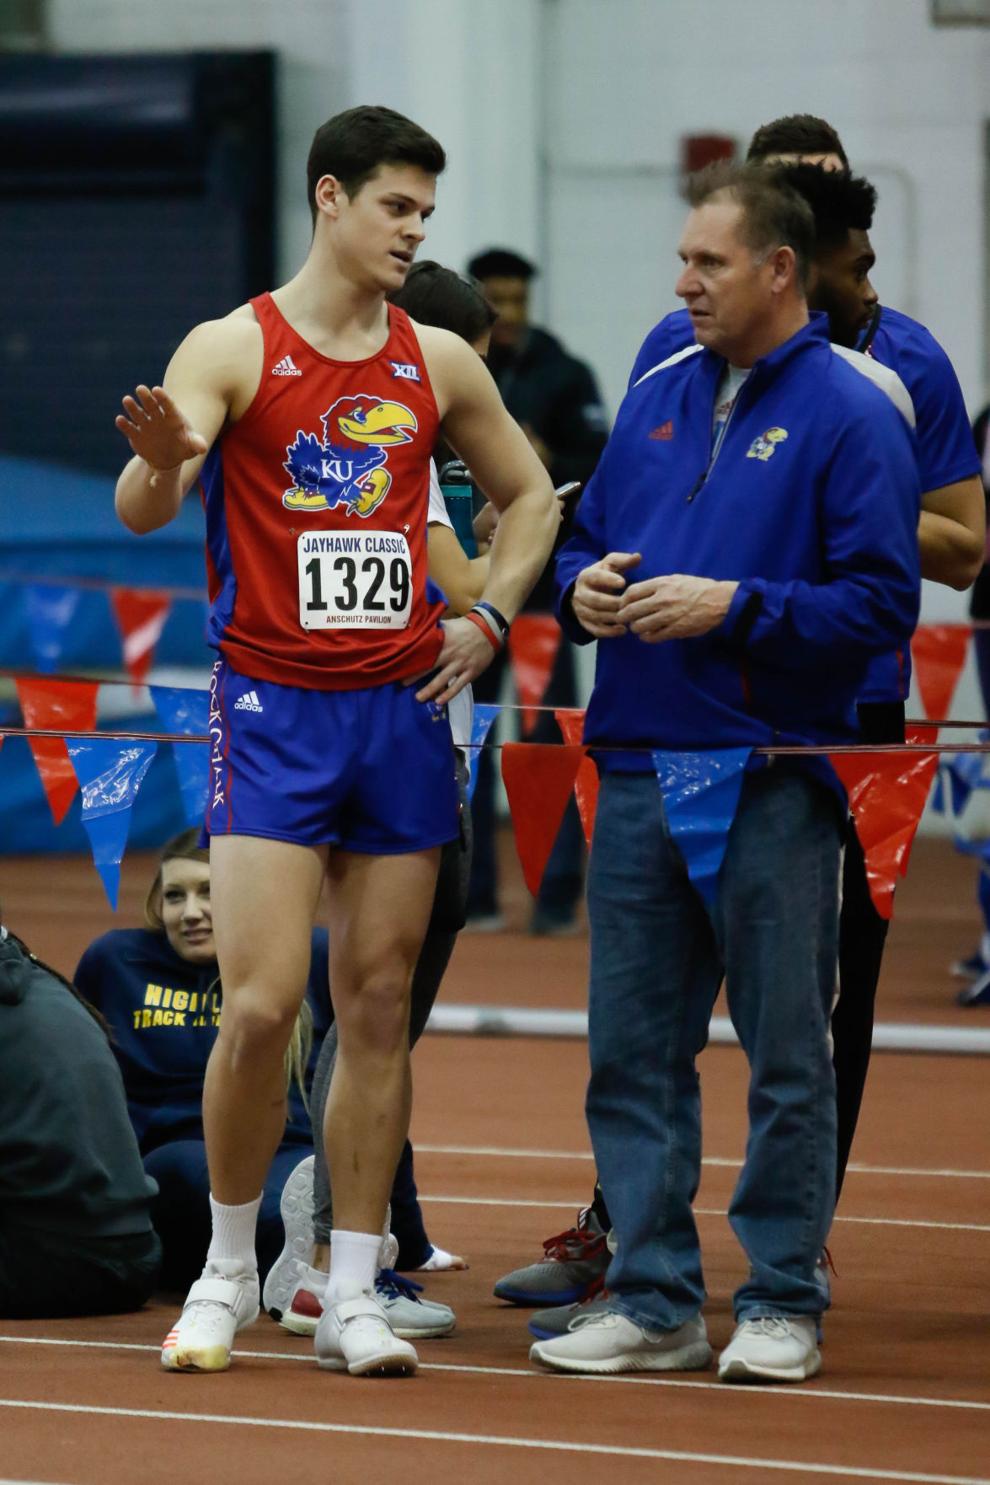 Kansas track and field coach Tom Hays collects national honors for